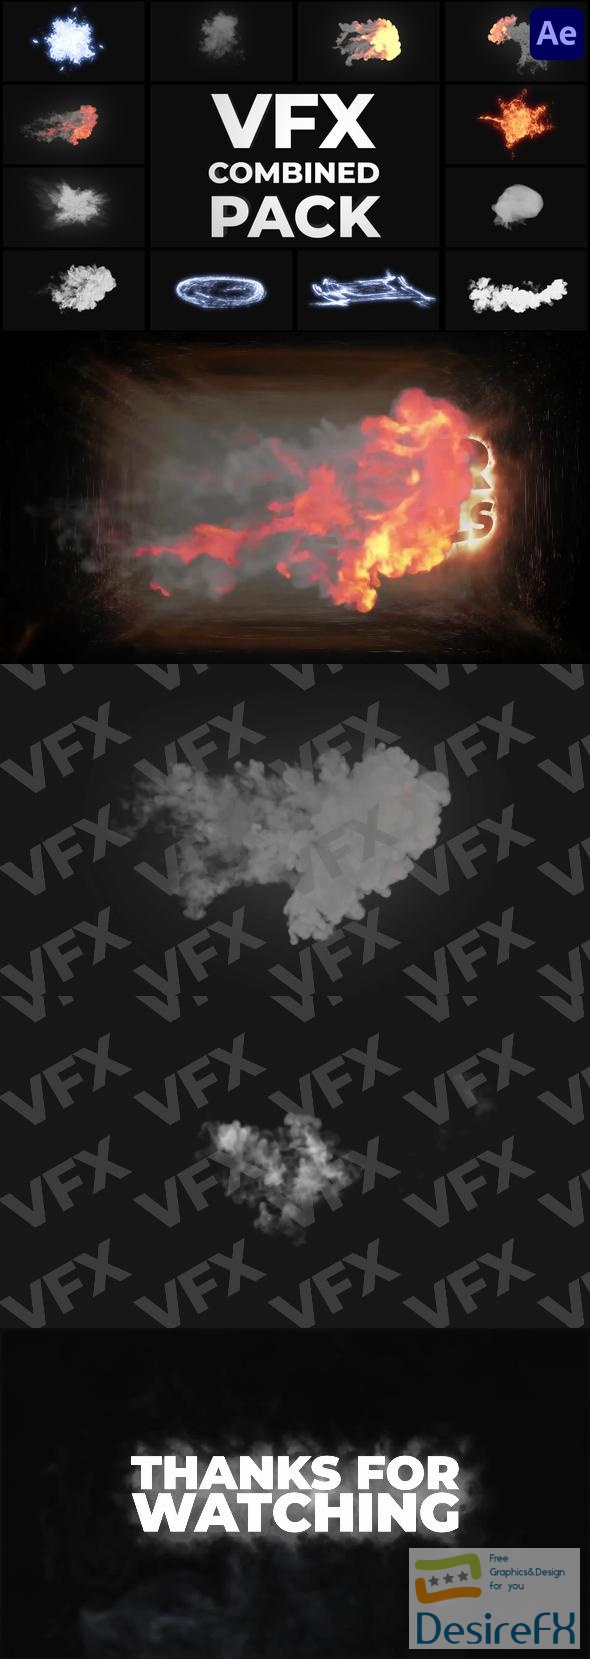 VideoHive VFX Combined Pack for After Effects 47852325